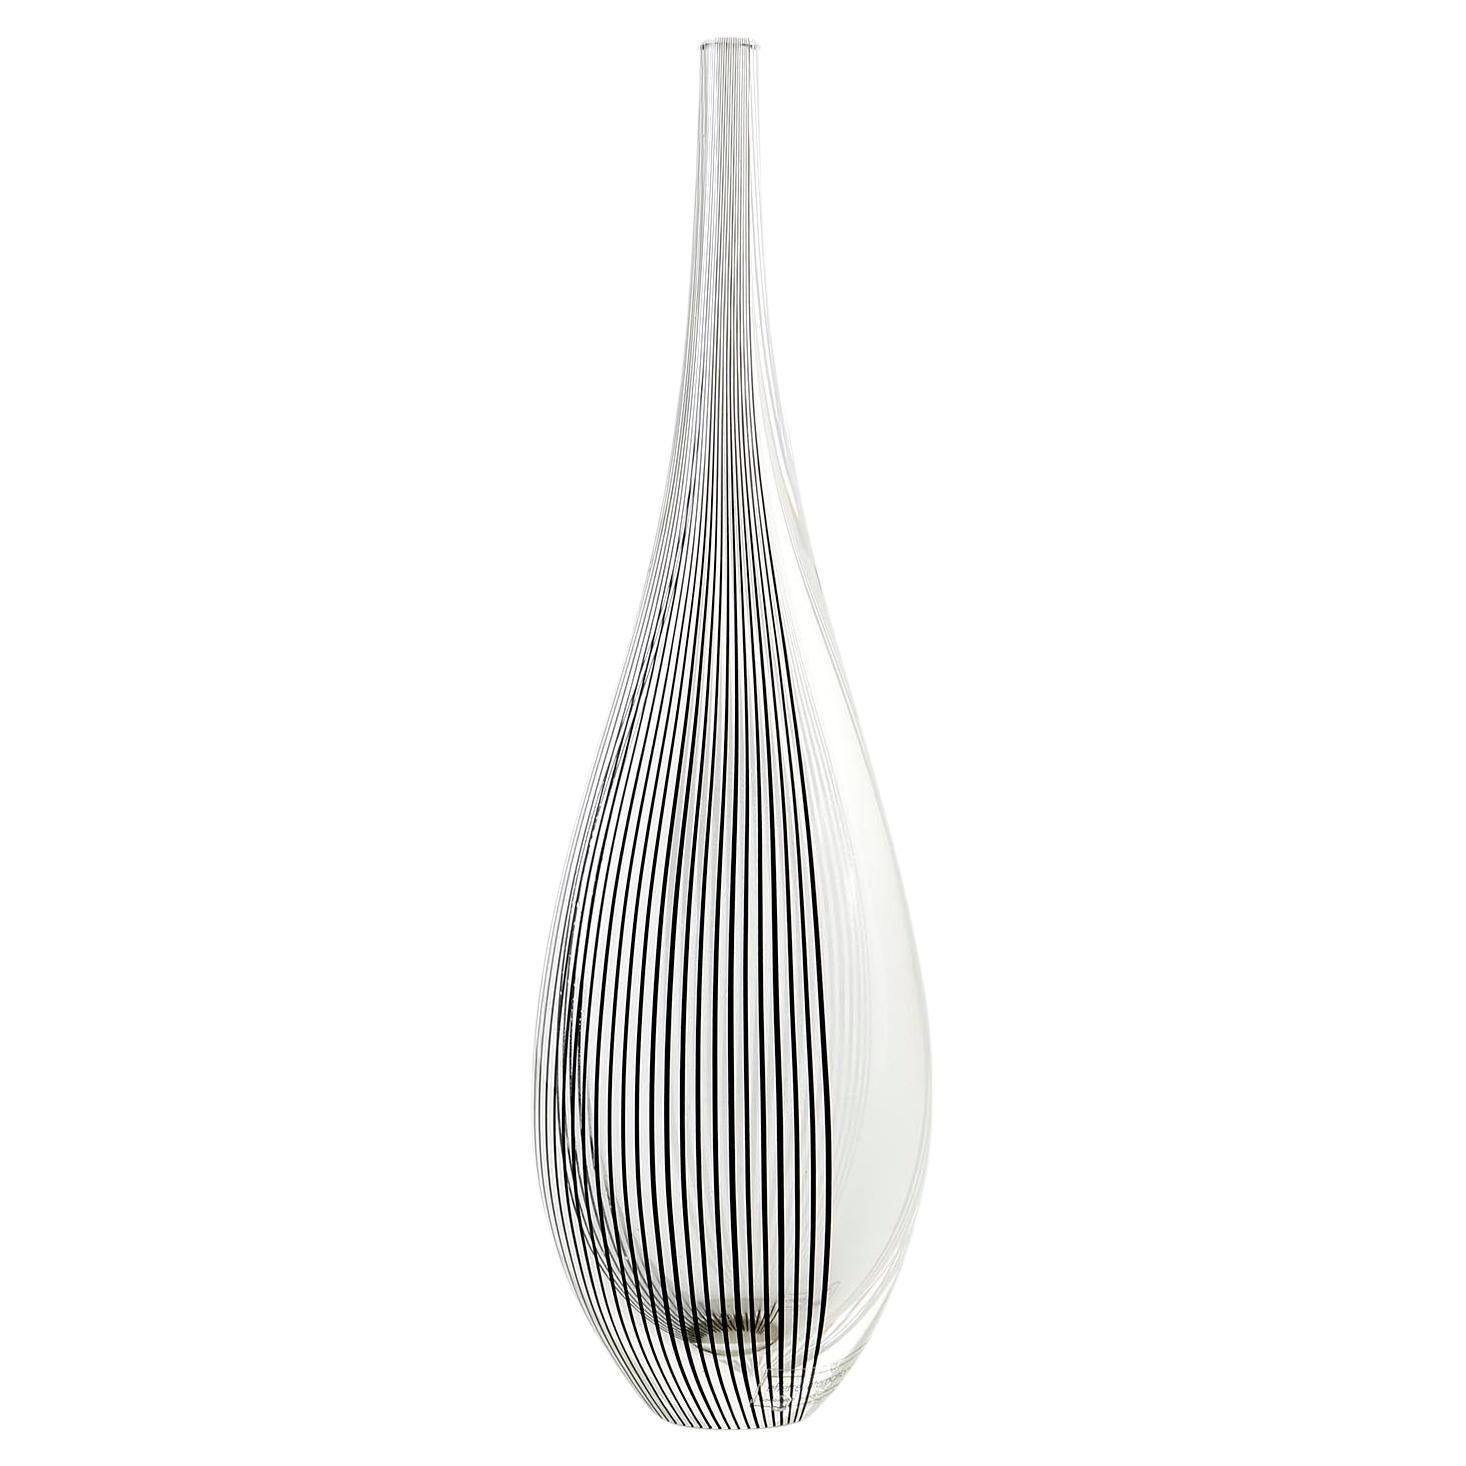 Modern Vase Lino Tagliapietra for Effetre Italy, Black White Stripped Clear Glass, 1987 For Sale